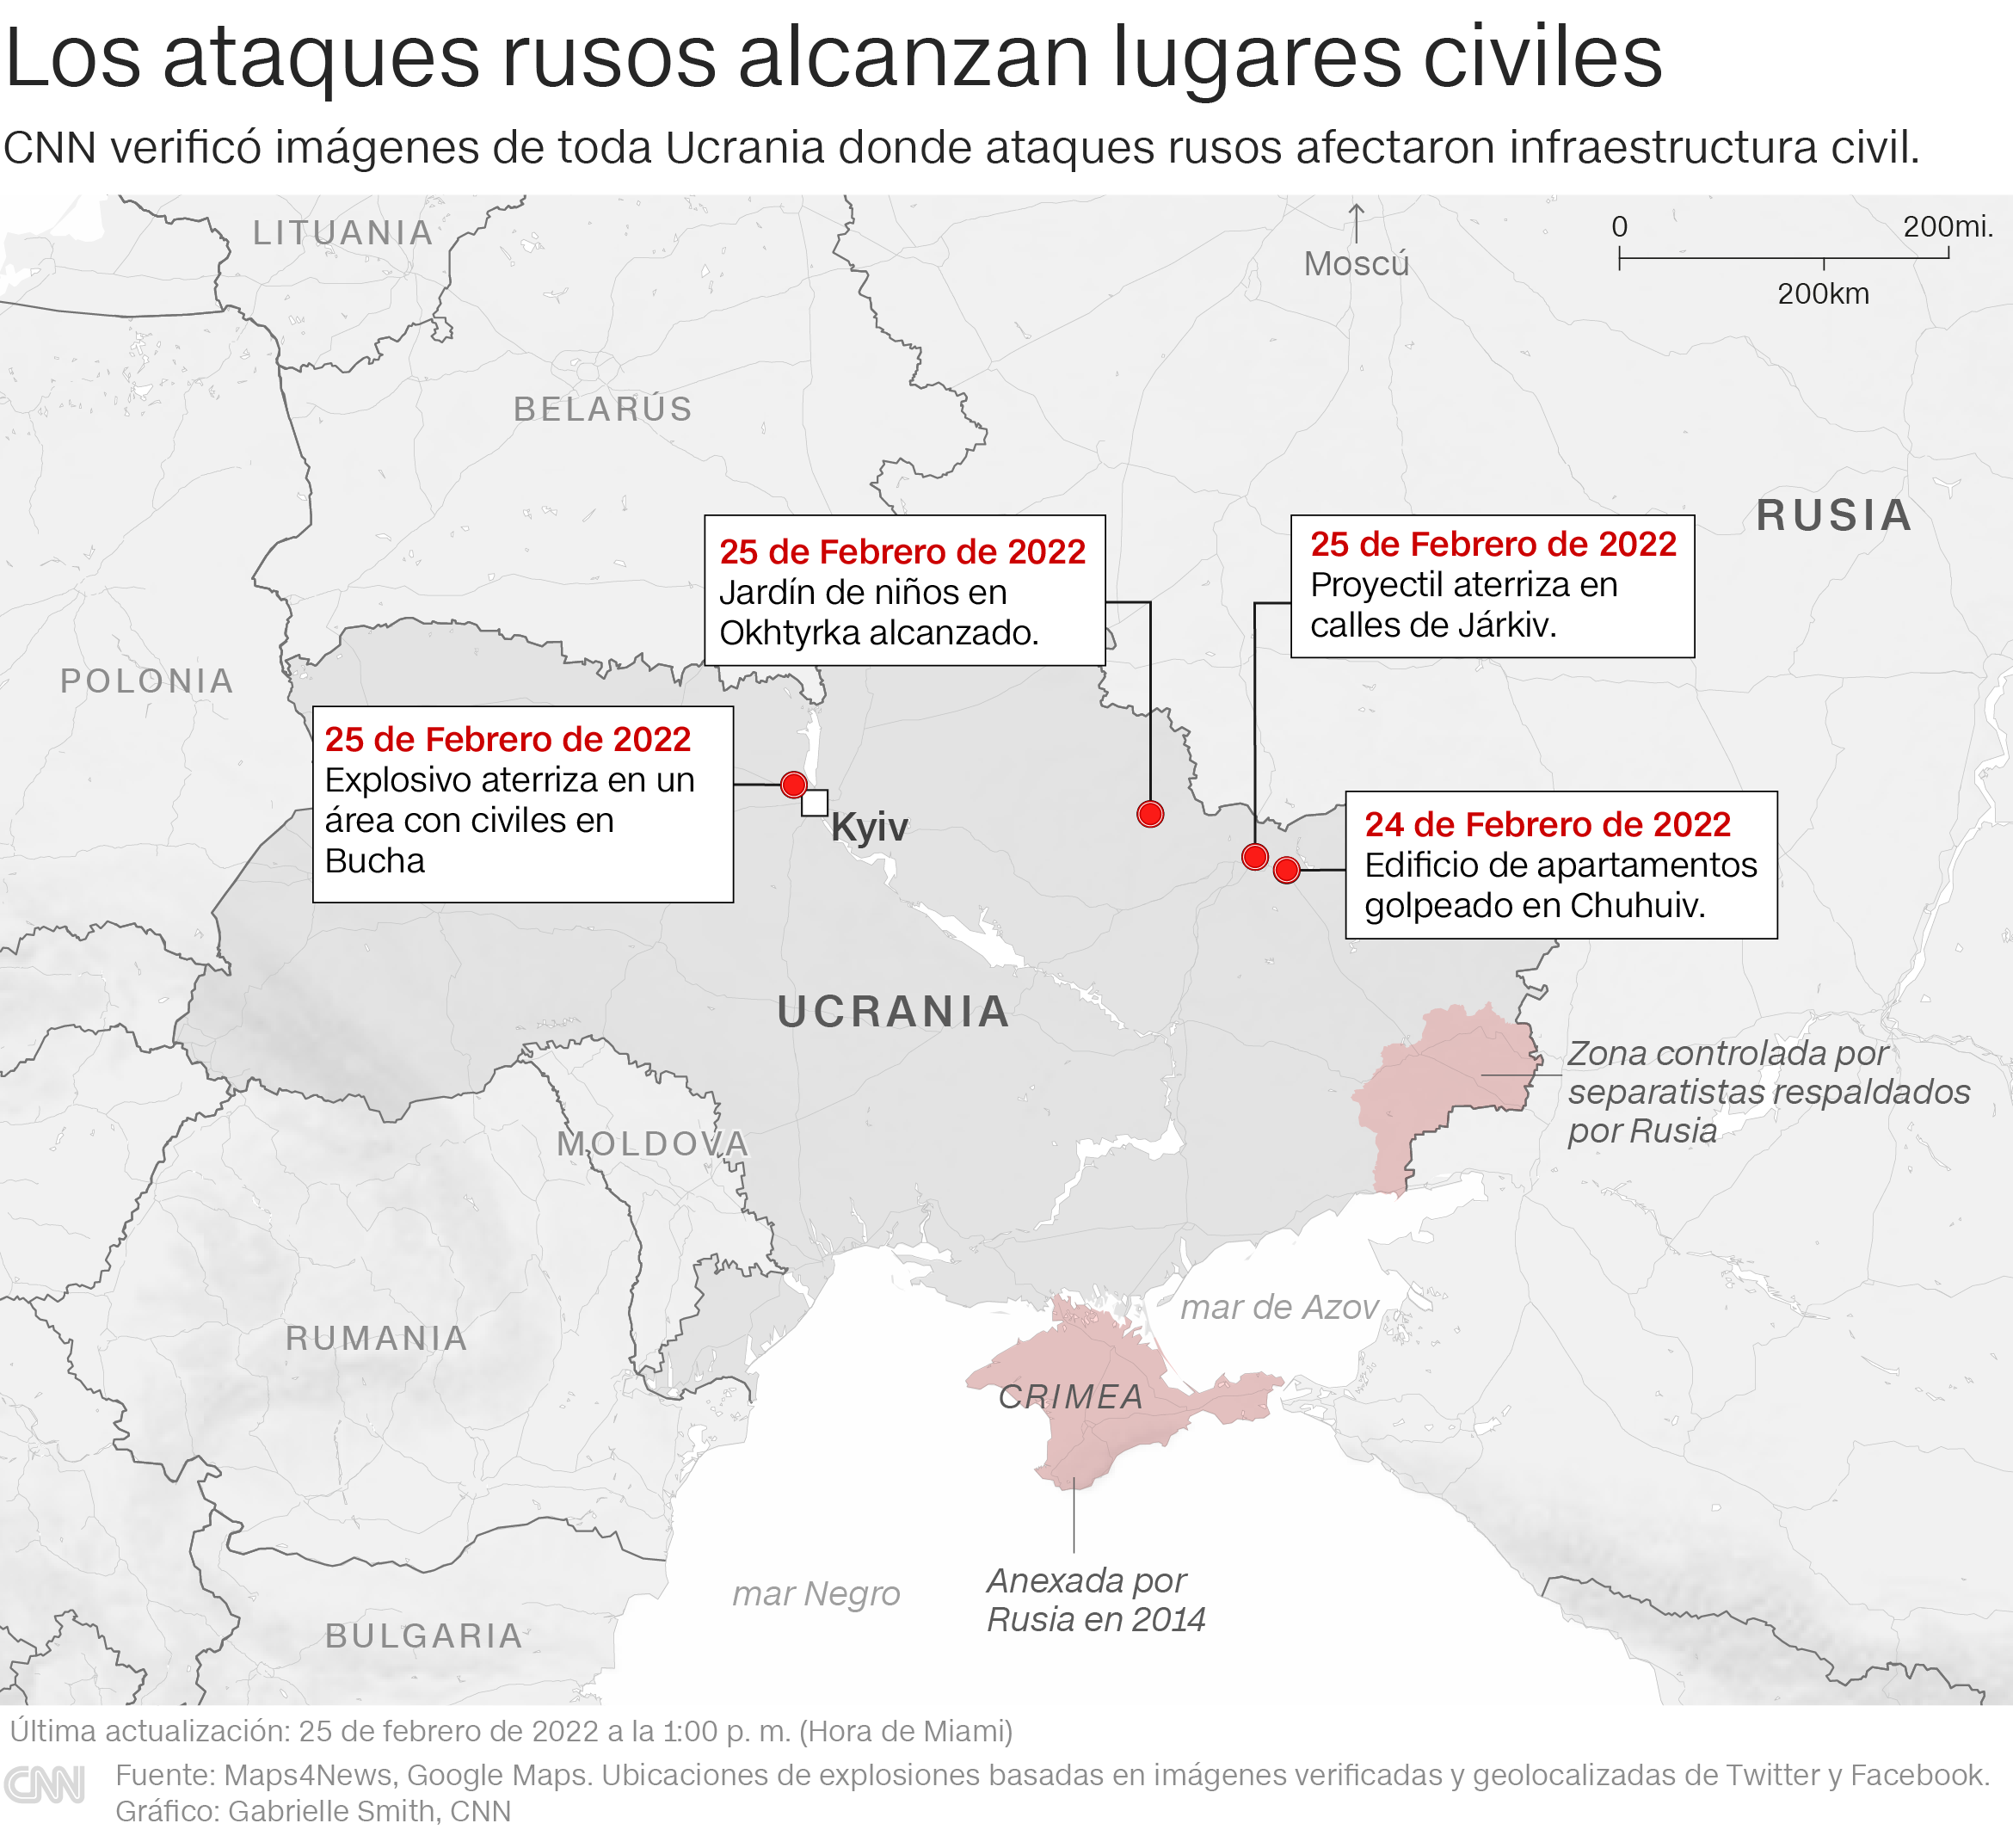 Civilian bases in Ukraine have been hit by Russian attacks